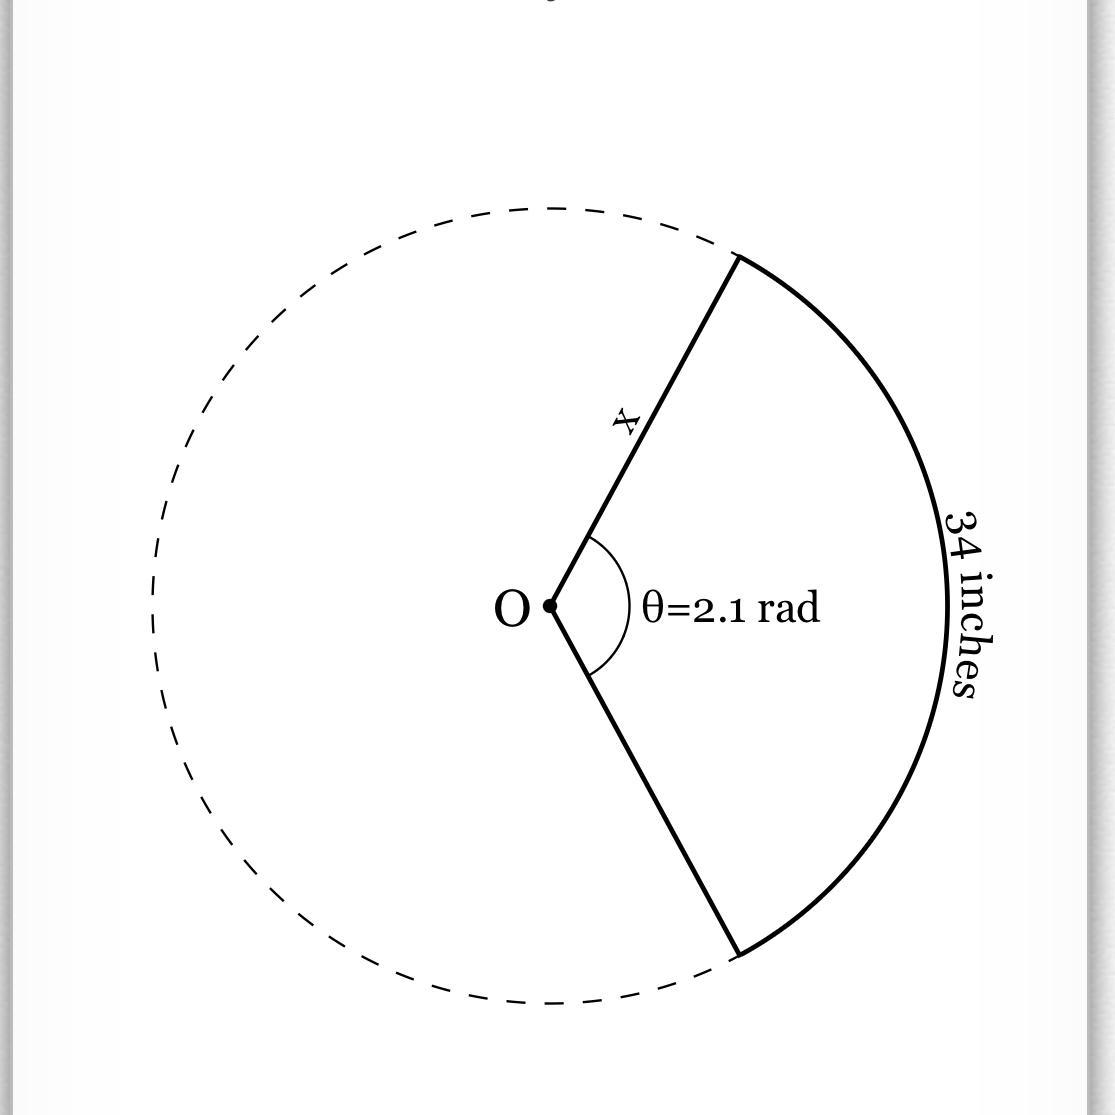 Circle O Shown Below Has An Arc Of Length 34 Inches Subtended By An Angle Of 2.1 Radians. Find The Length